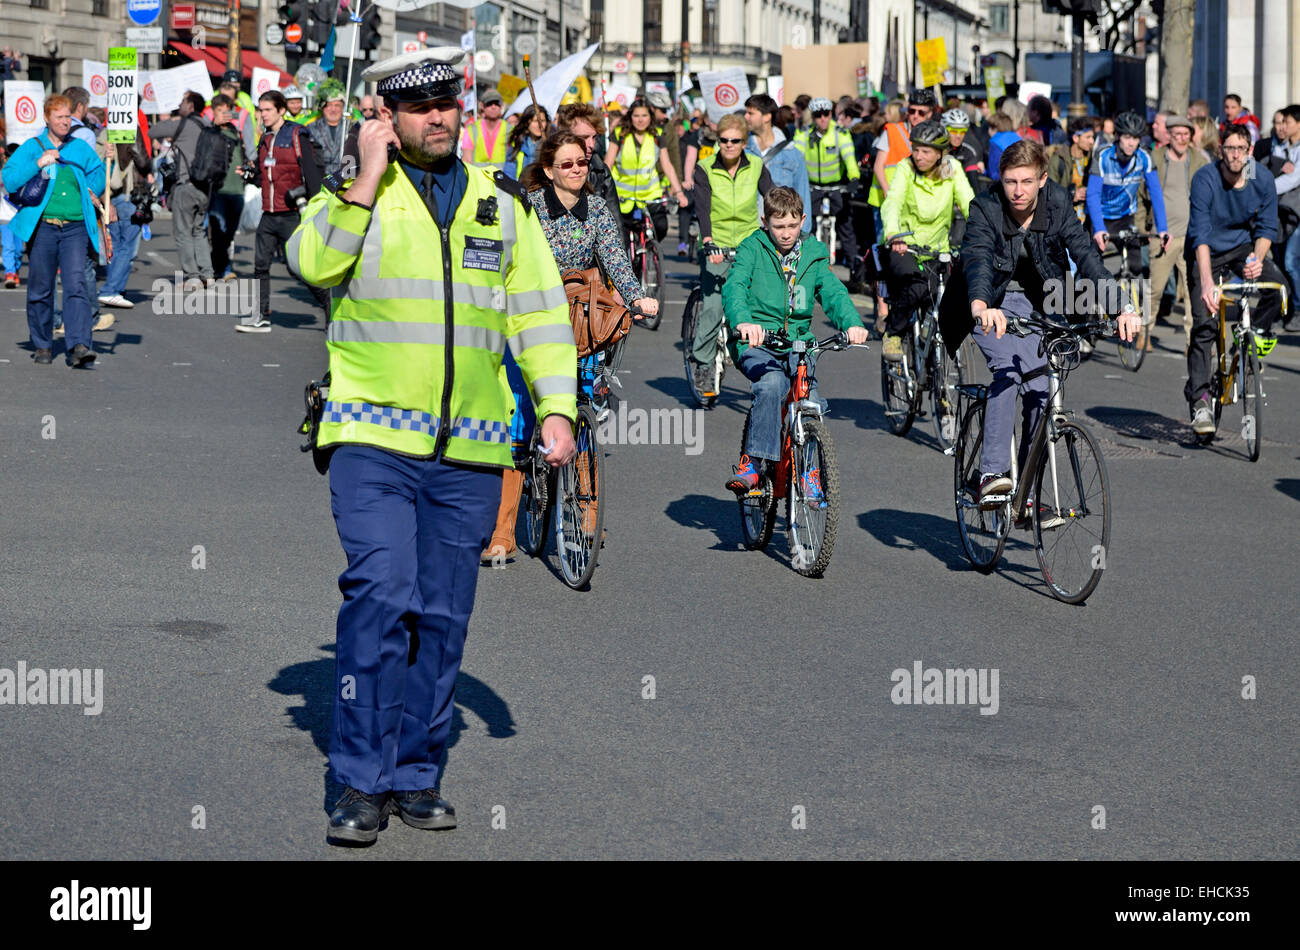 London, 7th March. Time To Act climate march through London to Parliament for a rally. Metropolitan police officer Stock Photo